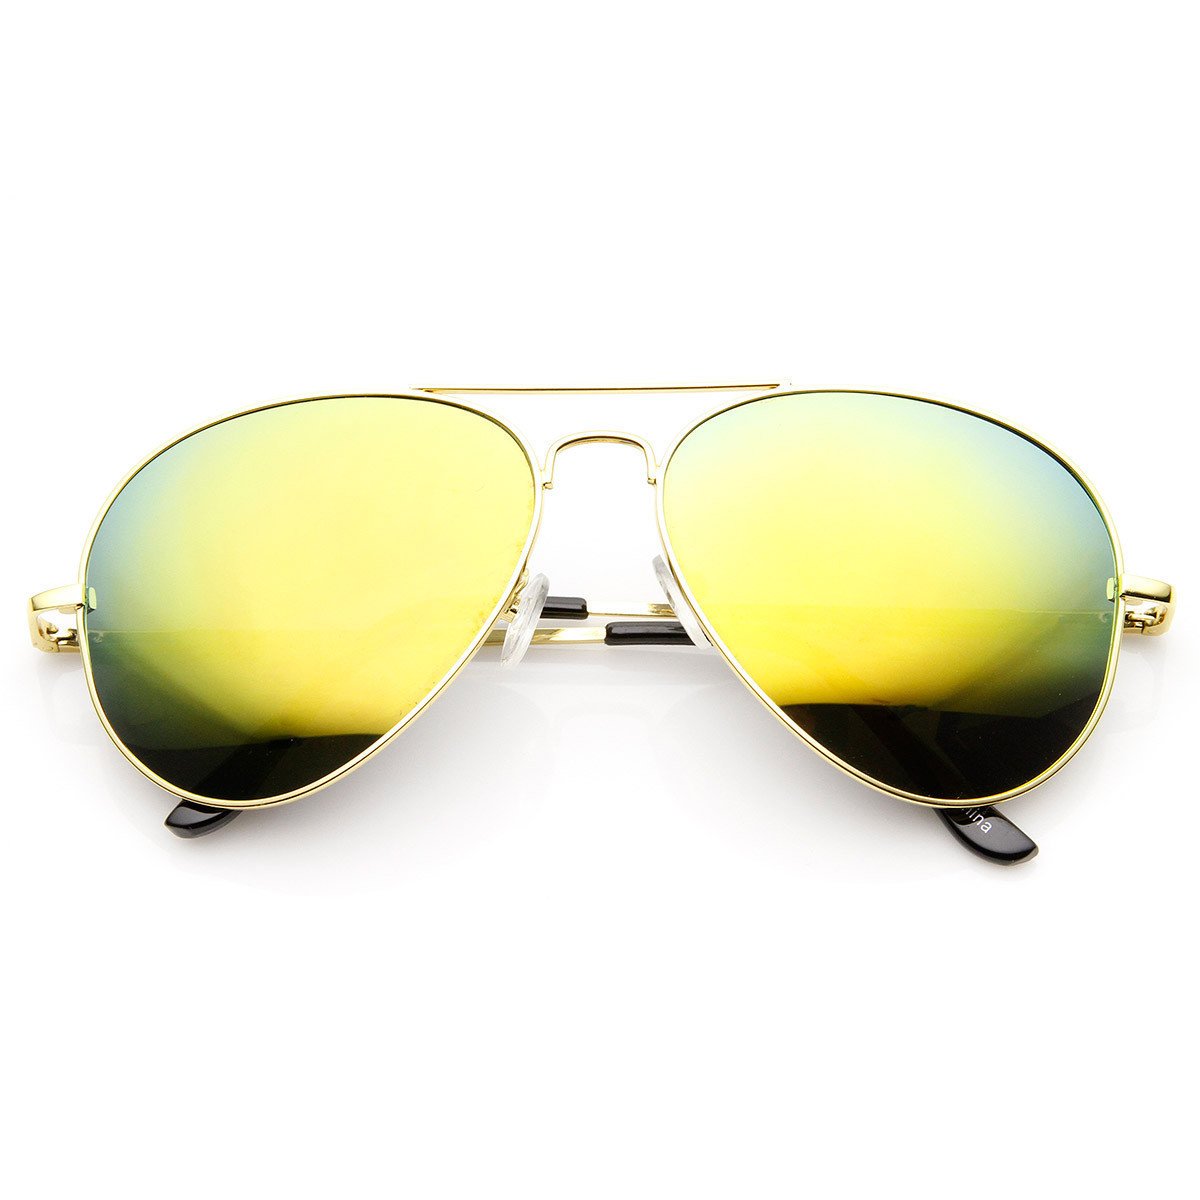 Classic Metal Teardrop Color Mirror Lens Aviator Sunglasses W/ Spring Hinges - 1486 - Gold Mixed (3-Pack)